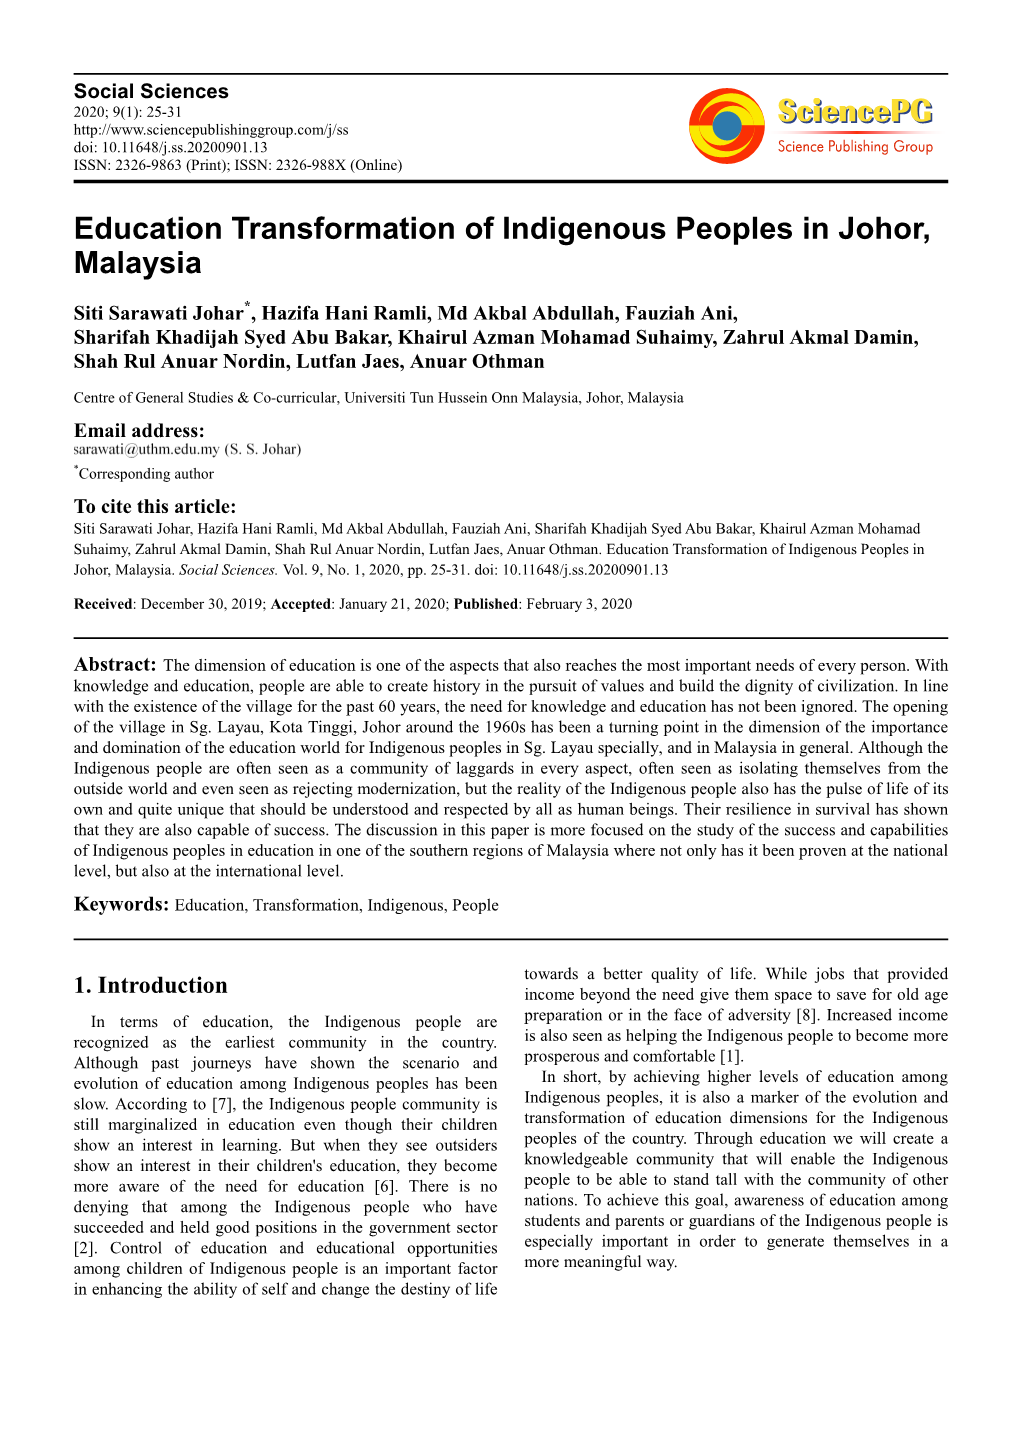 Education Transformation of Indigenous Peoples in Johor, Malaysia